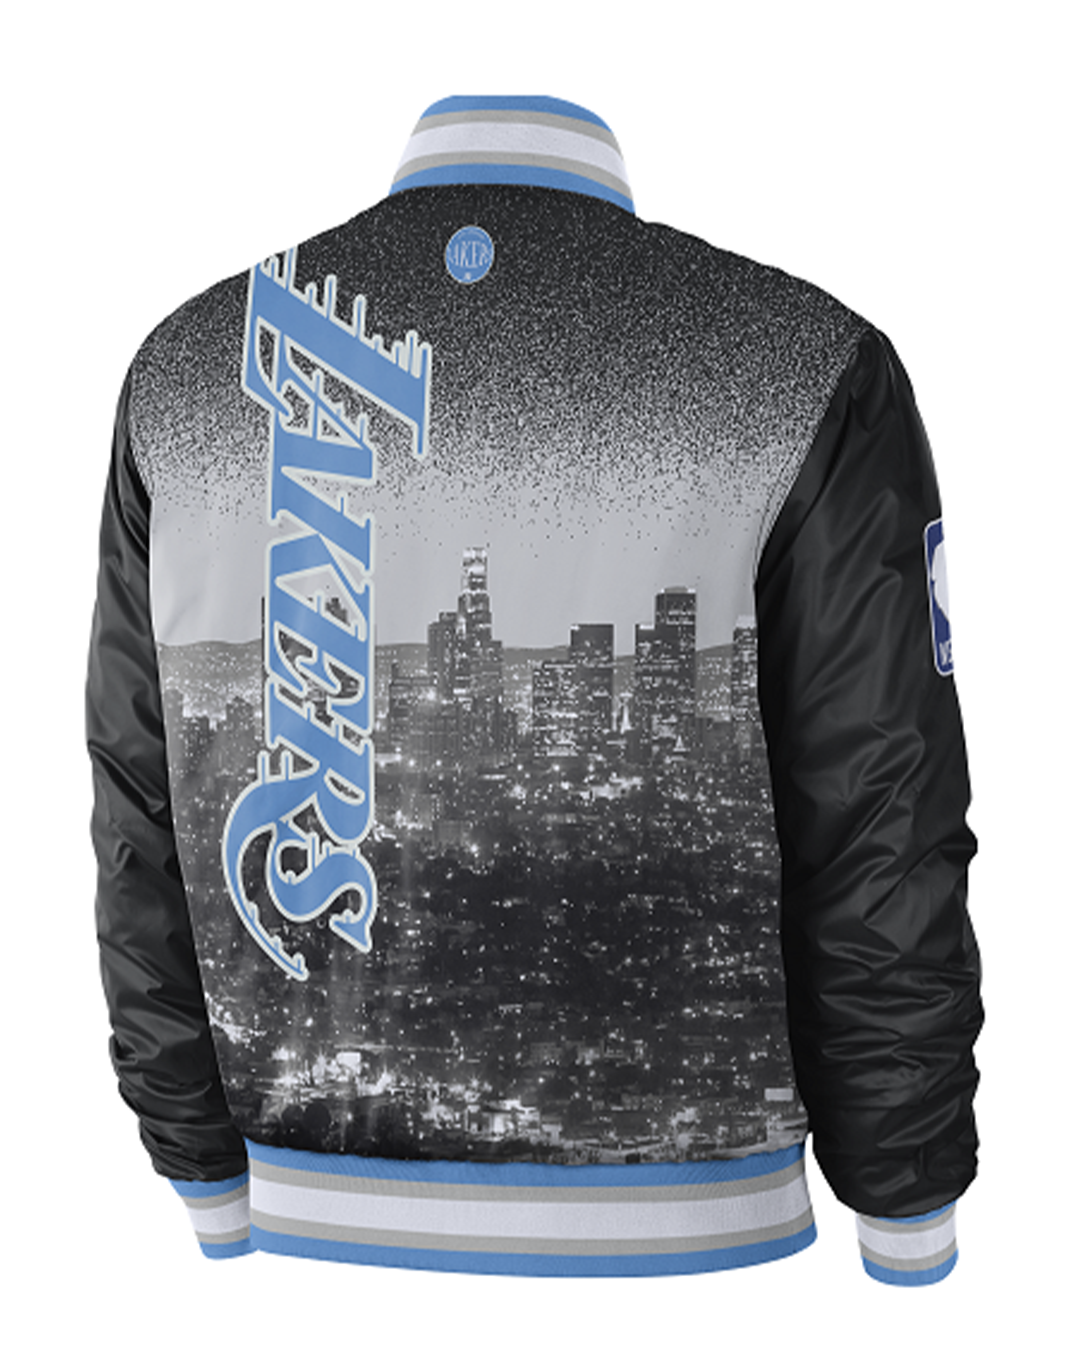 Los Angeles Lakers City Edition Courtside Jacket - Lakers Store